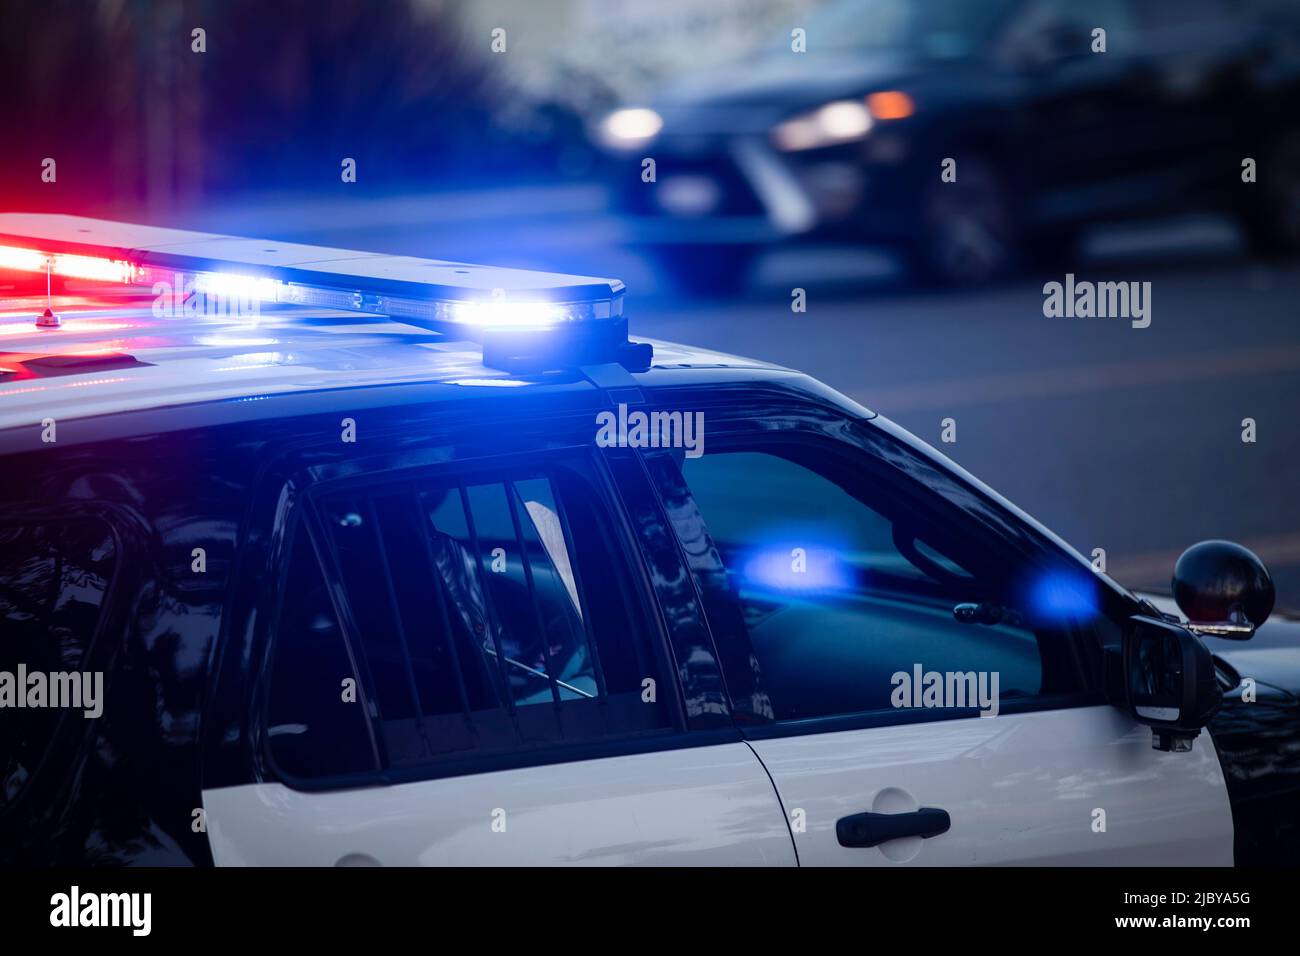 A police unit responds to the scene of an emergency. Stock Photo